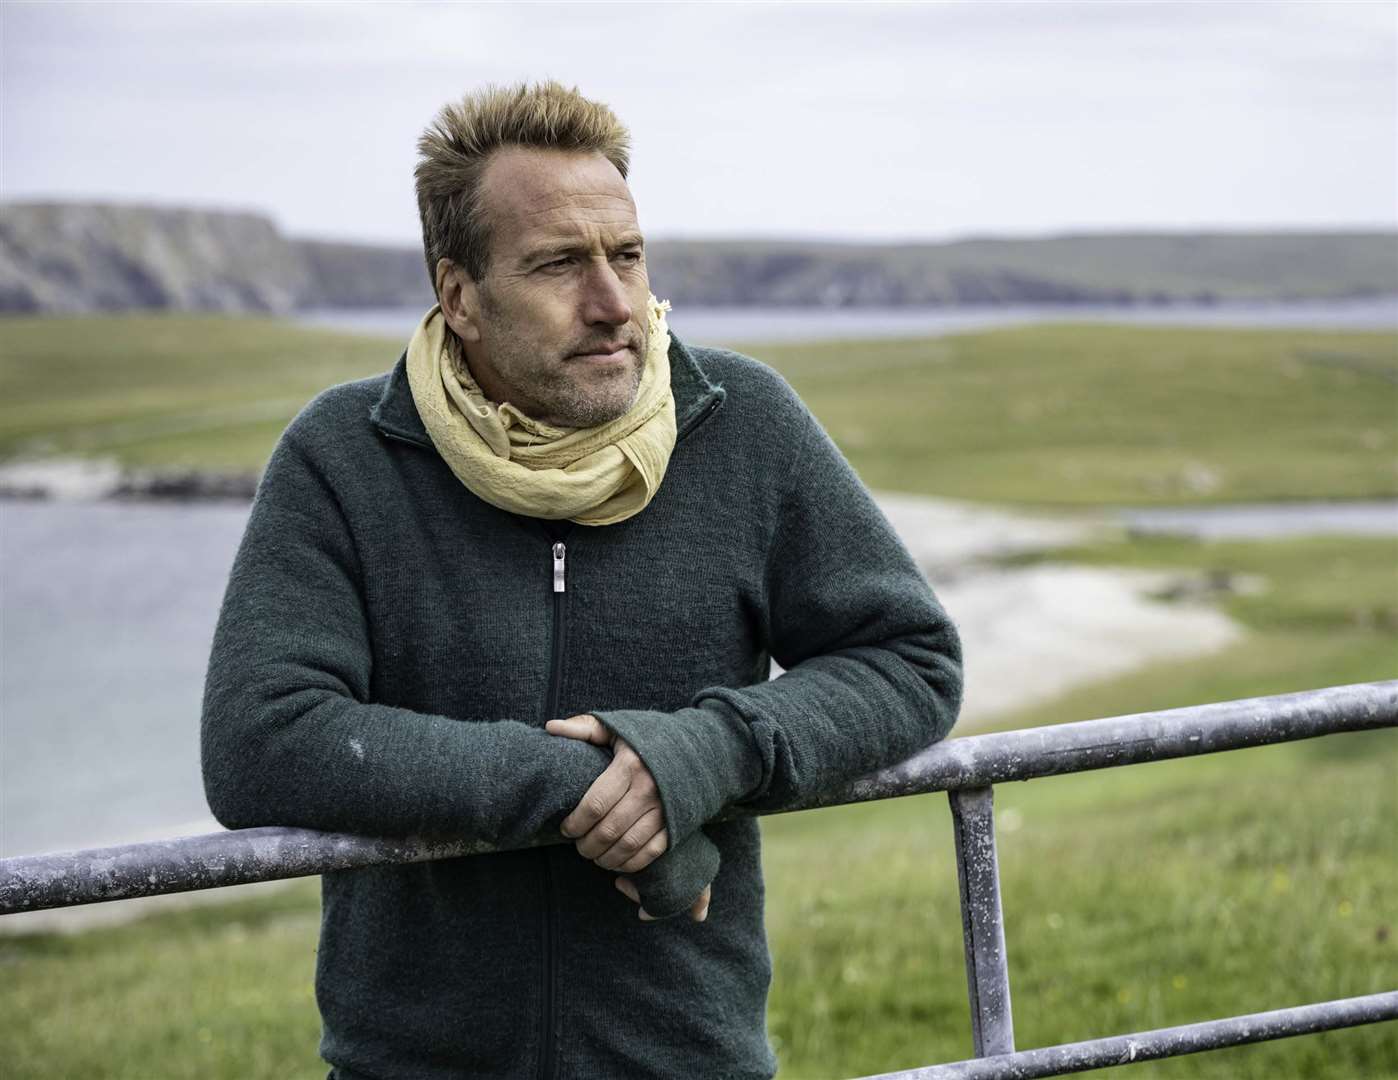 Presenter Ben Fogle visited the couple as part of his new Channel 5 show 'New Lives In The Wild'. Photo: Renegade Pictures (UK) Ltd